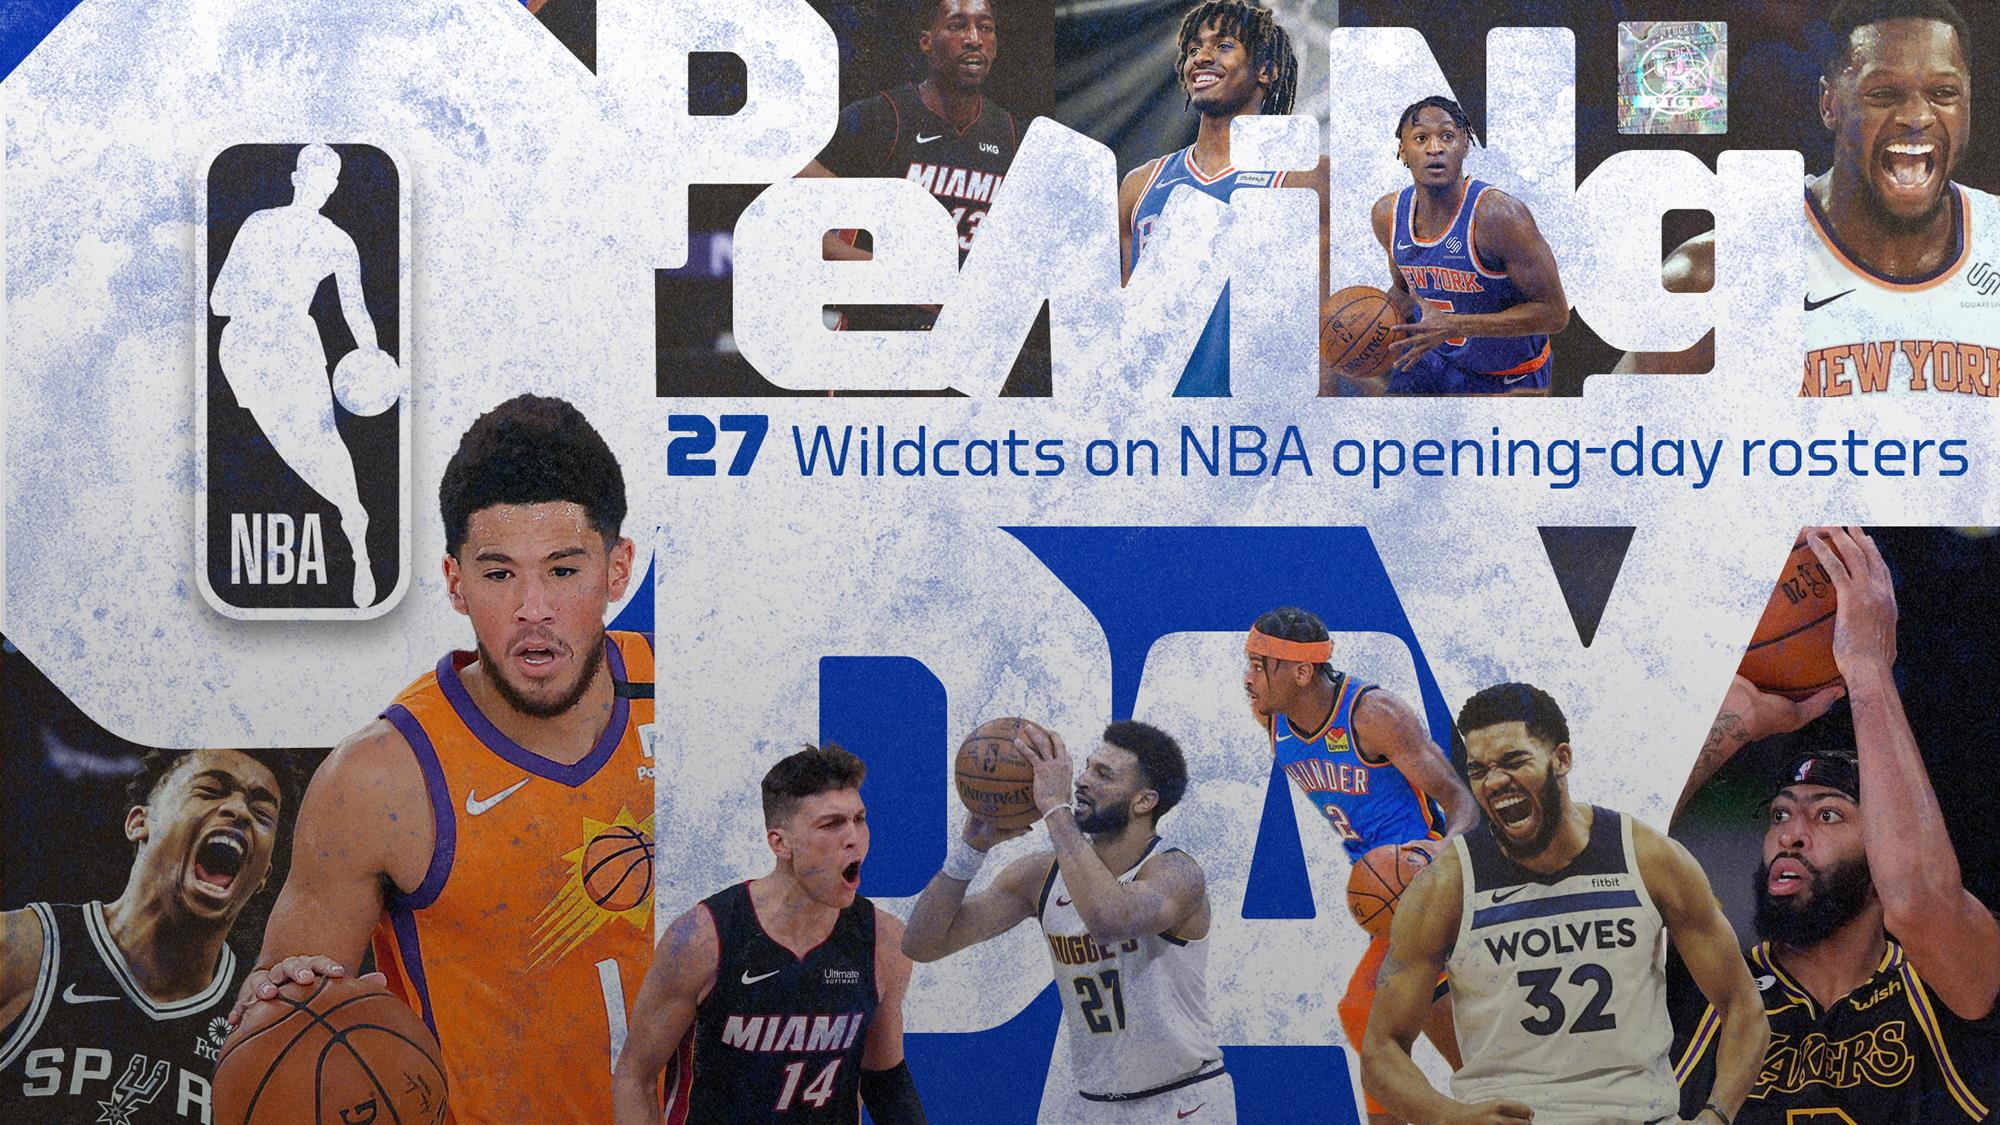 UK MBB Leads Nation with 27 Players on NBA Opening-Day Rosters